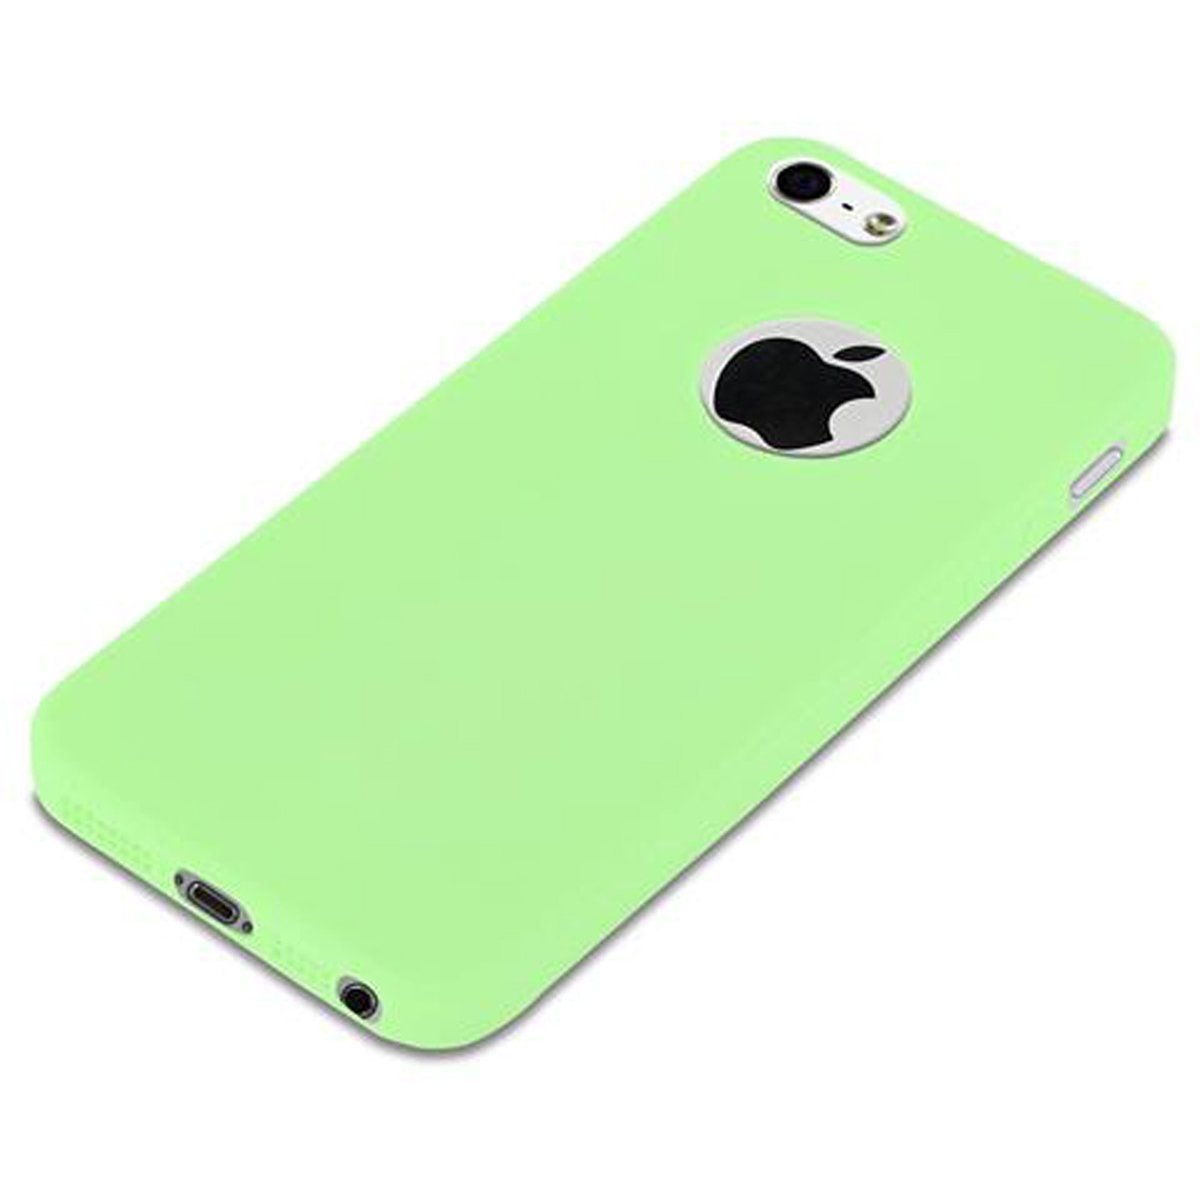 TPU GRÜN 2016, CADORABO im / Candy CANDY Apple, 5S iPhone PASTELL Backcover, / Style, 5 SE Hülle